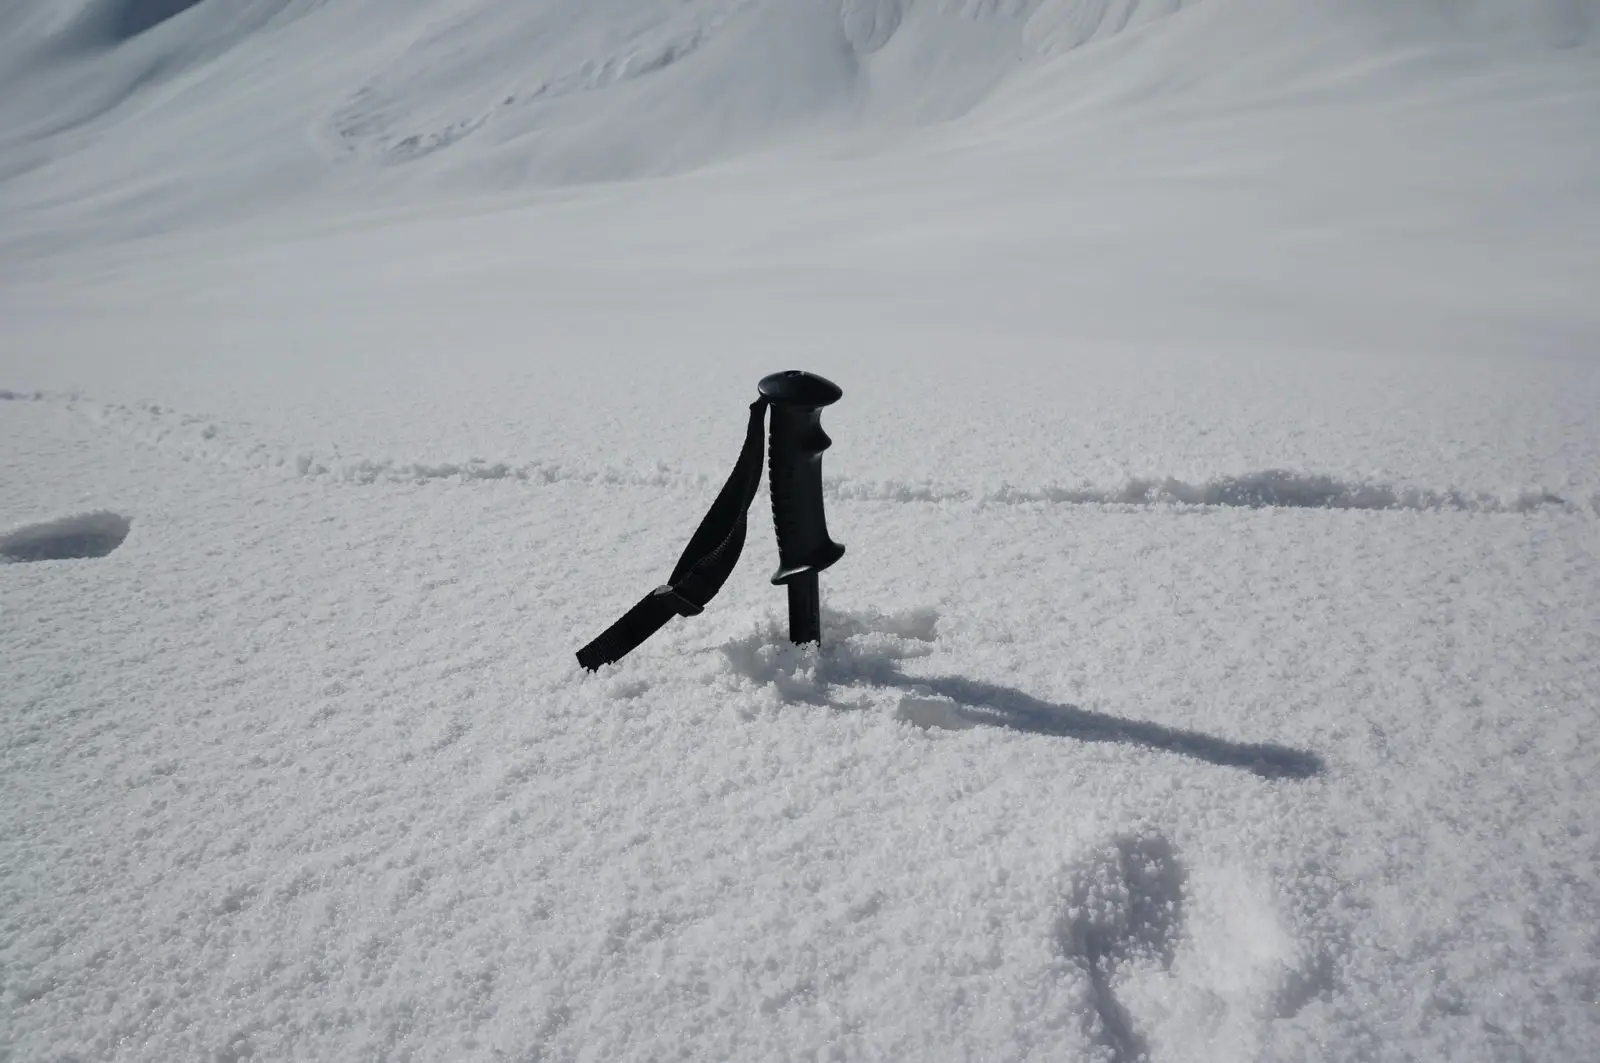 A trekking pole without a snow basket sunken deep into the snow - Photo: Andrew & Annemarie (CC)